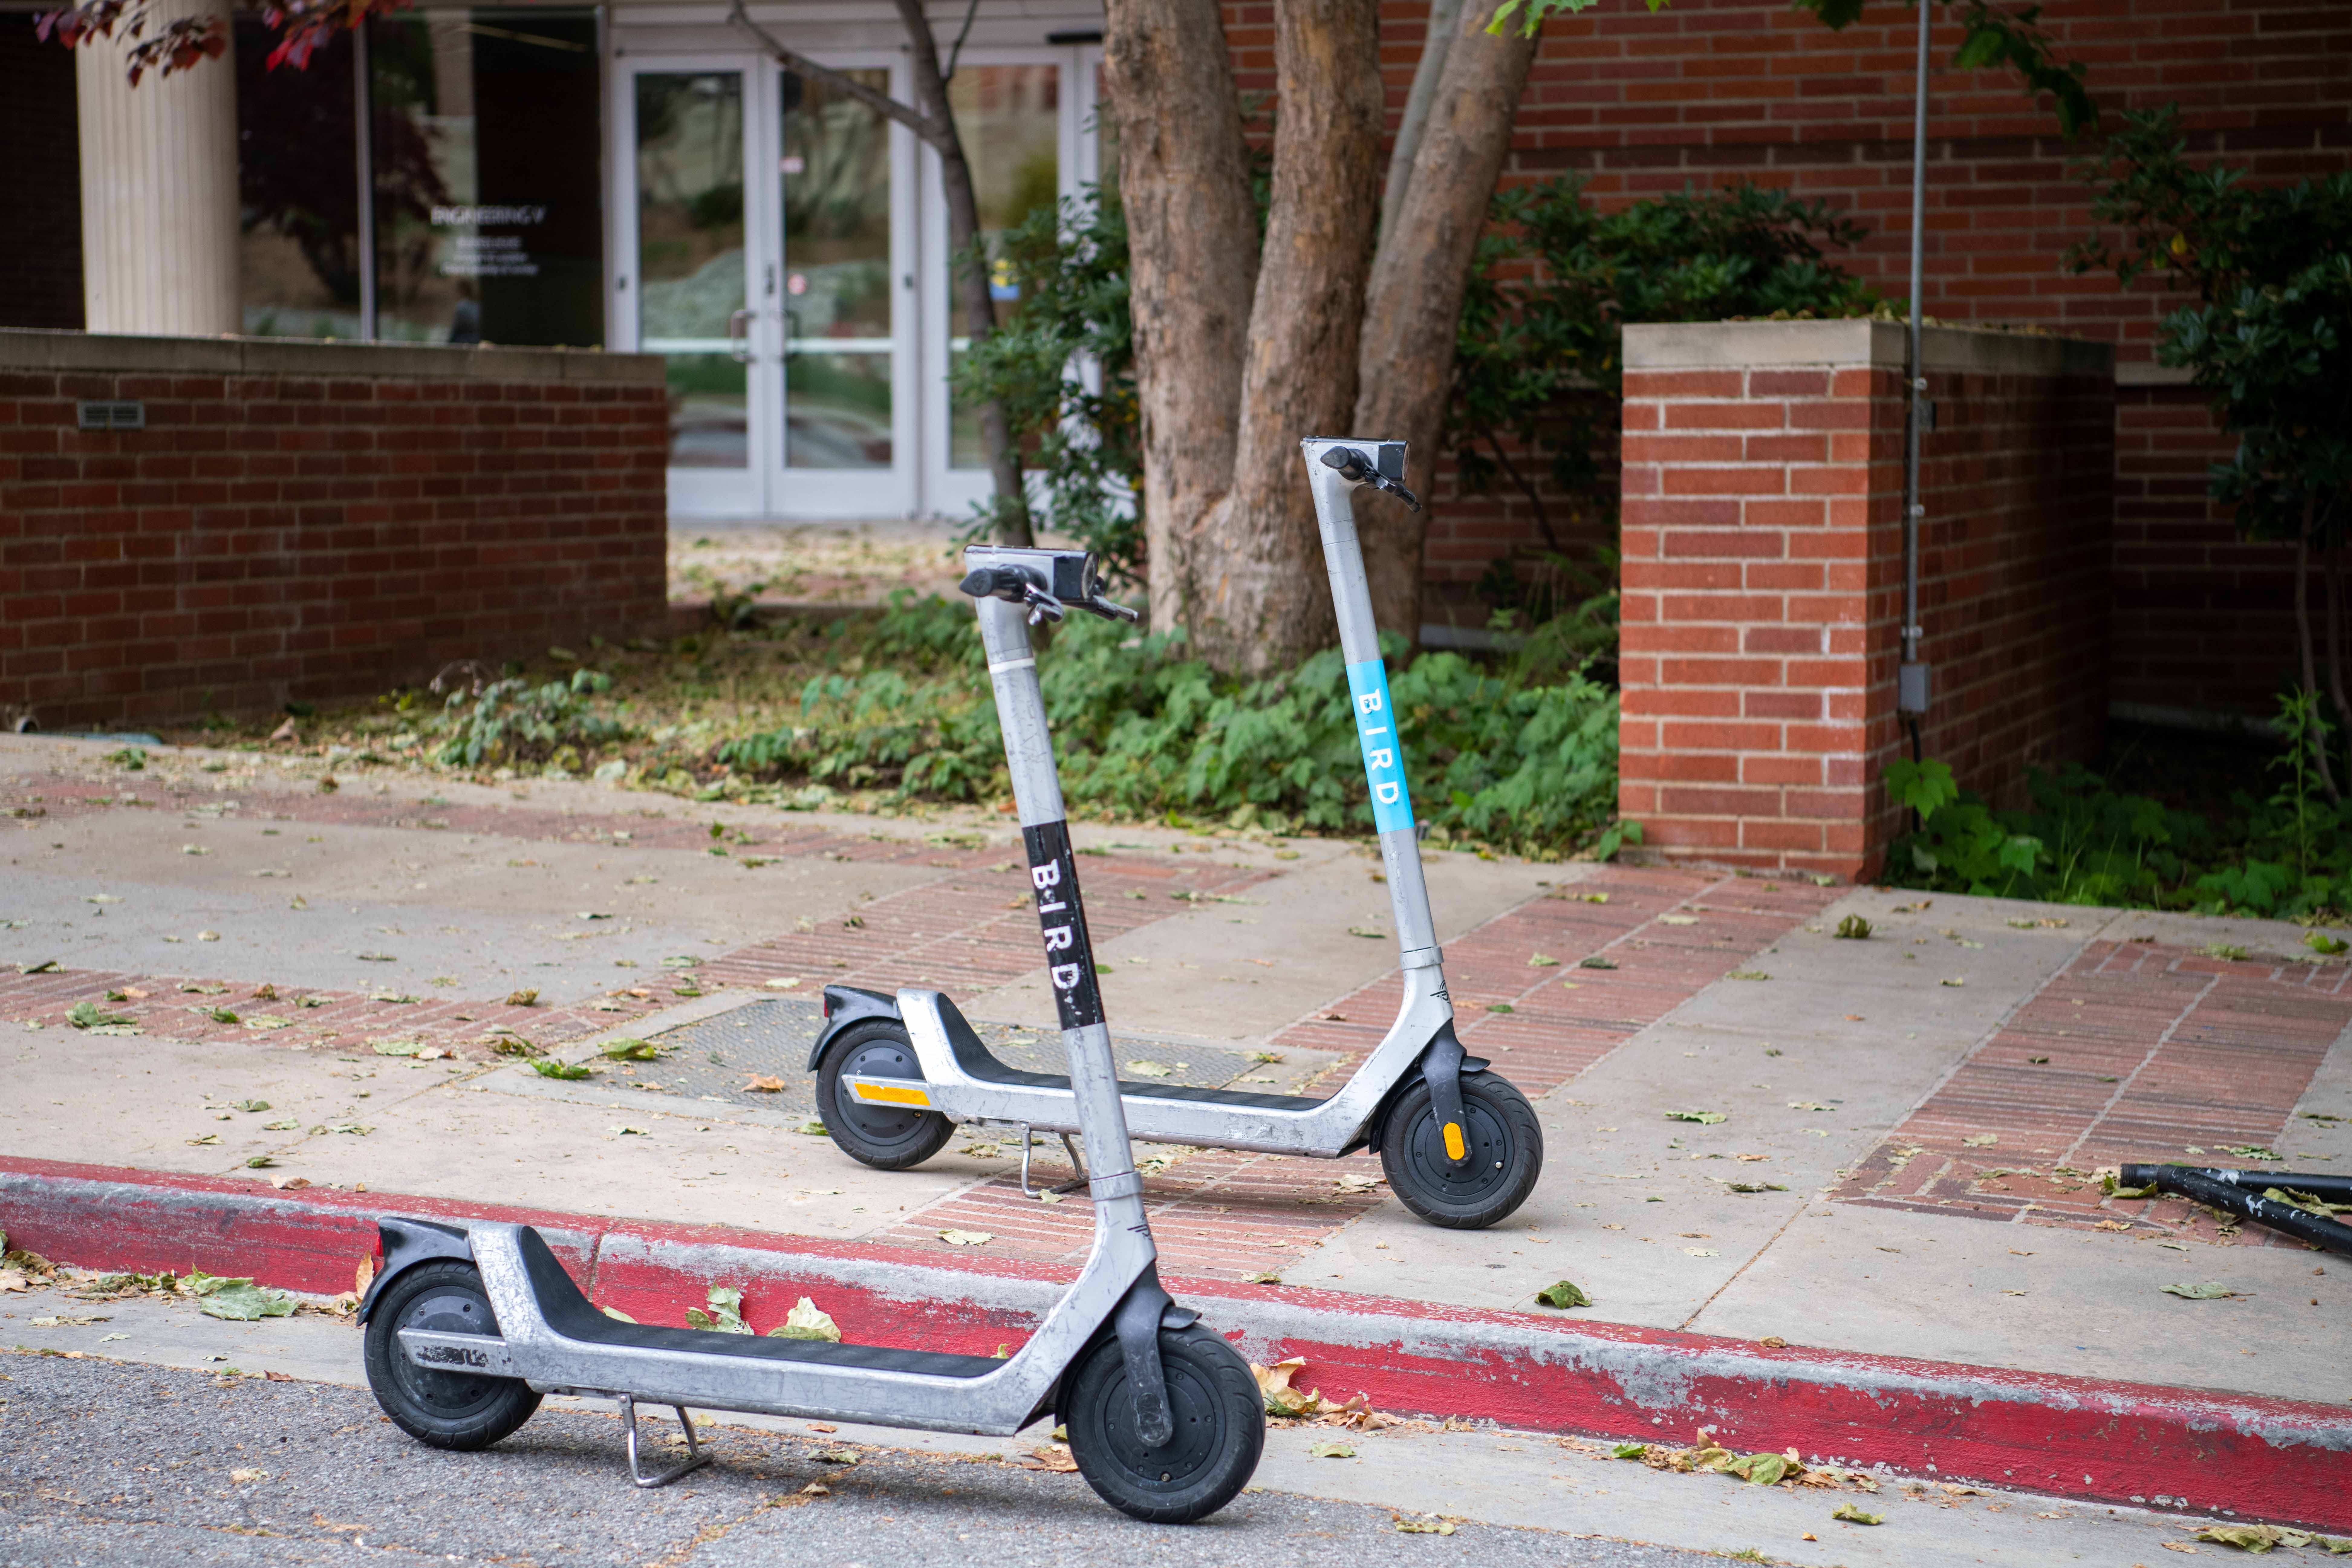 Indgang Brig Hummingbird Improper e-scooter usage prompts increase in tickets, fines for students -  Daily Bruin